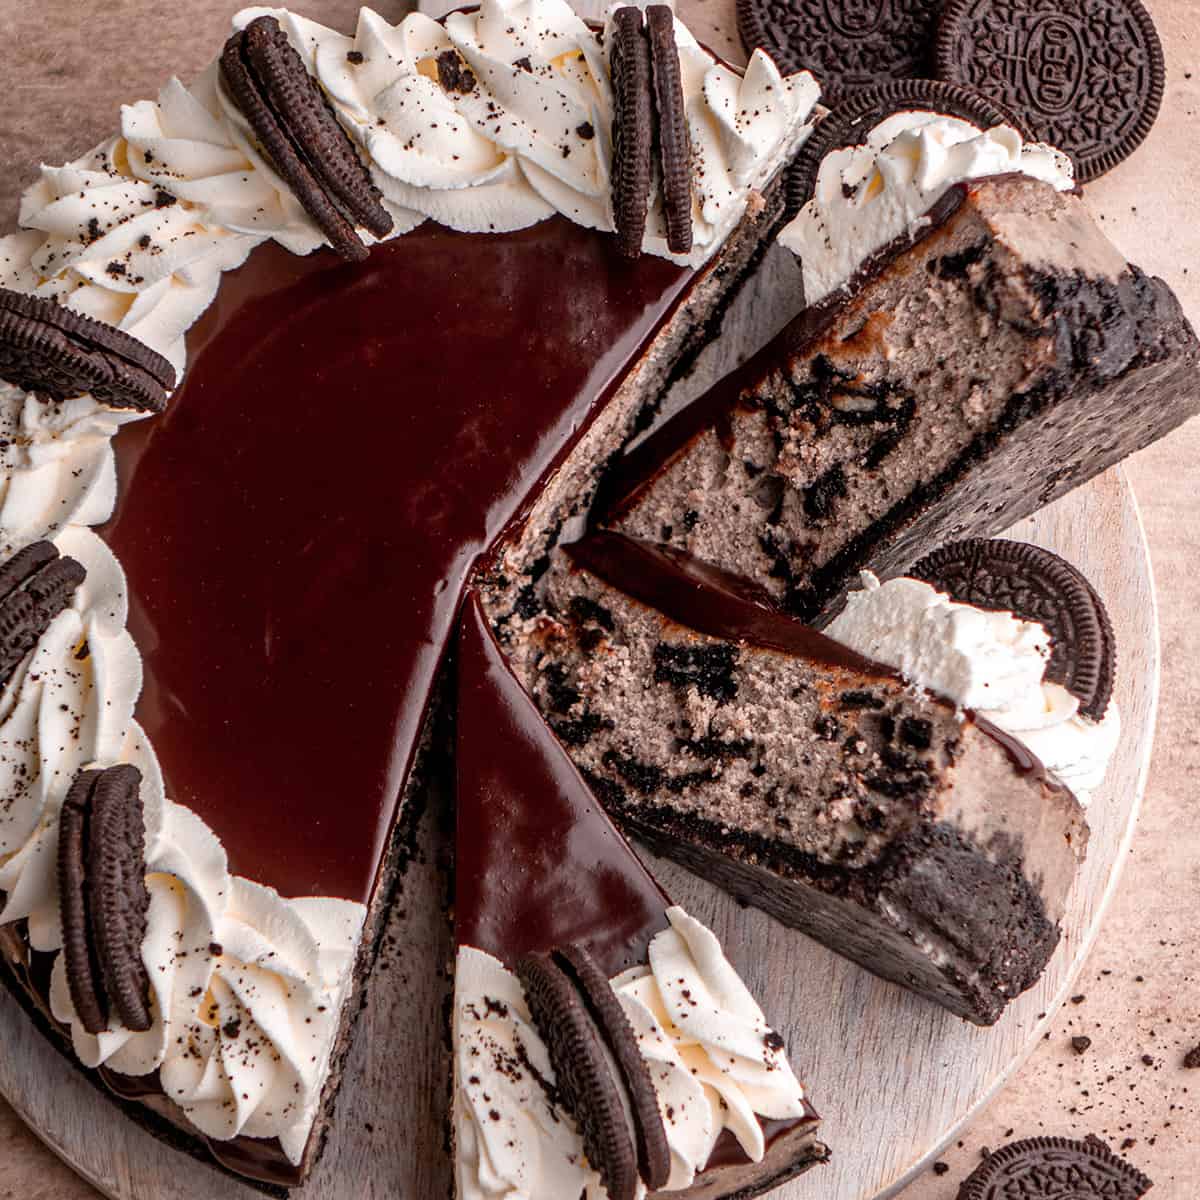 Oreo Cheesecake on a serving plate with 3 slices cut and two turned on their side so you can see the inside